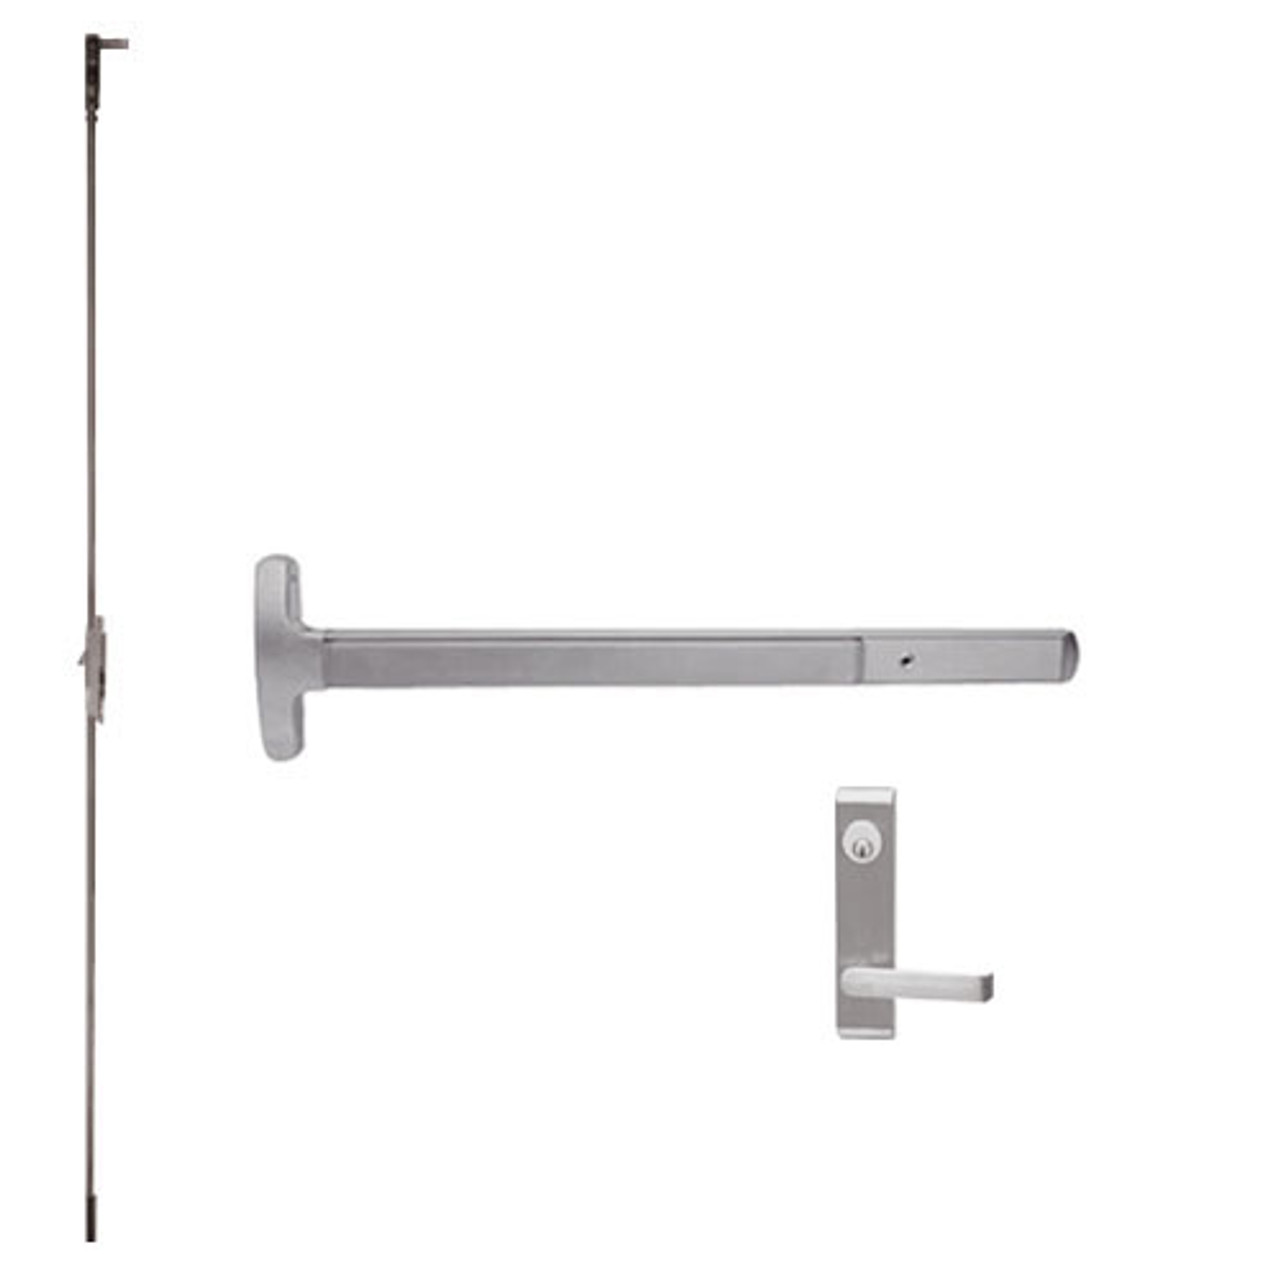 24-C-L-DANE-US32D-3-RHR Falcon Exit Device in Satin Stainless Steel